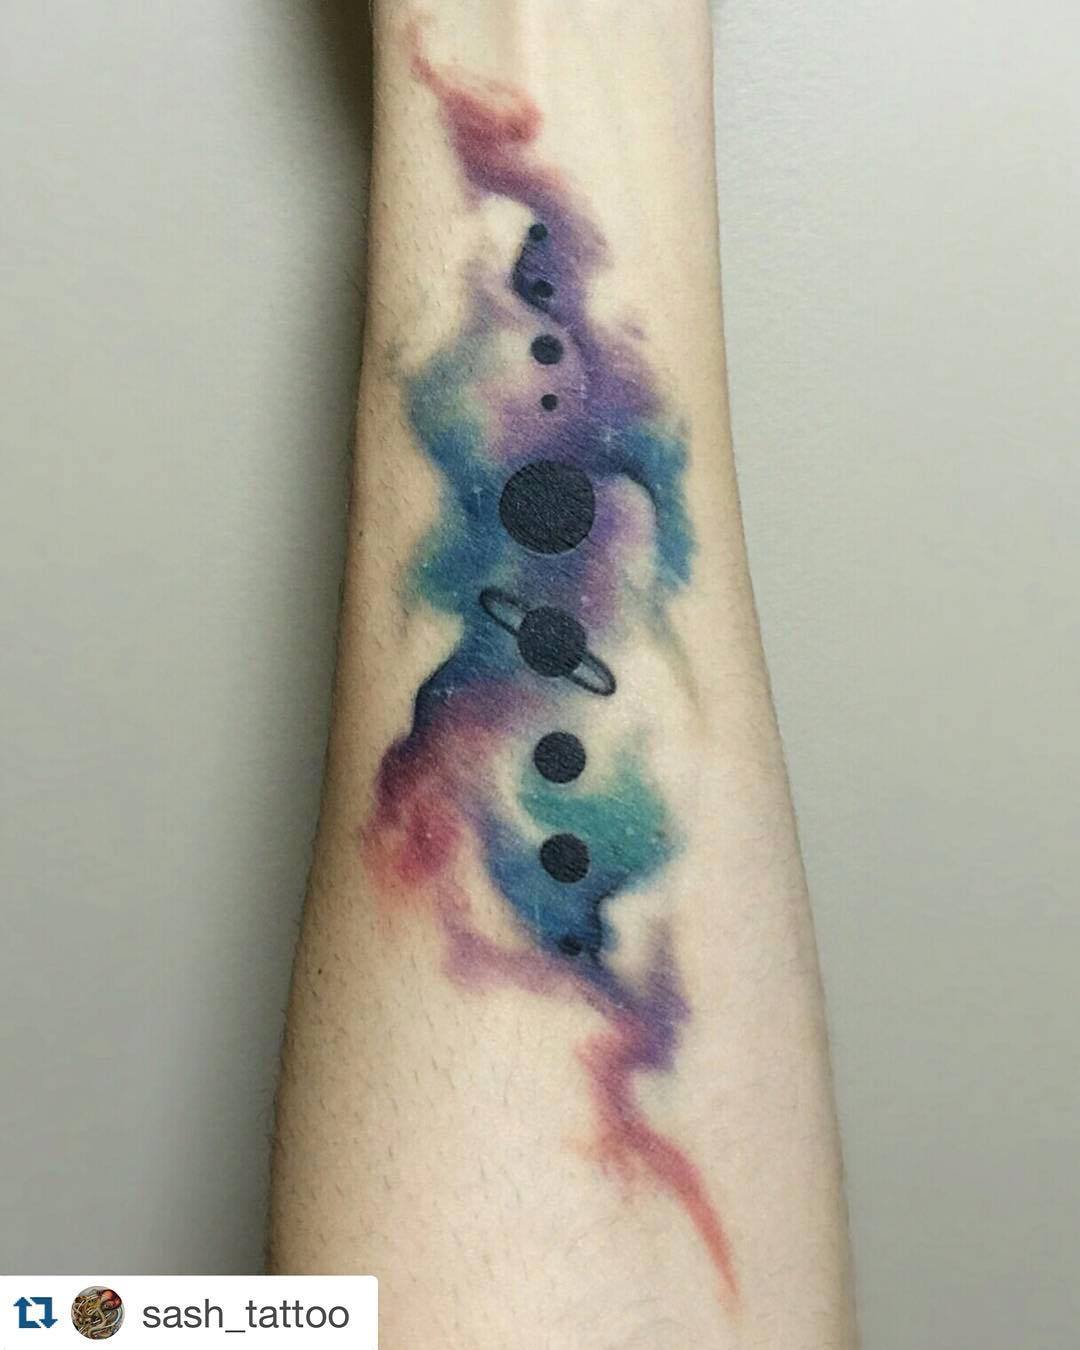 1032 Tattoo Studio  Watercolor galaxy cover up by artist eric Redd   text 5128978818 for appts by him  Facebook